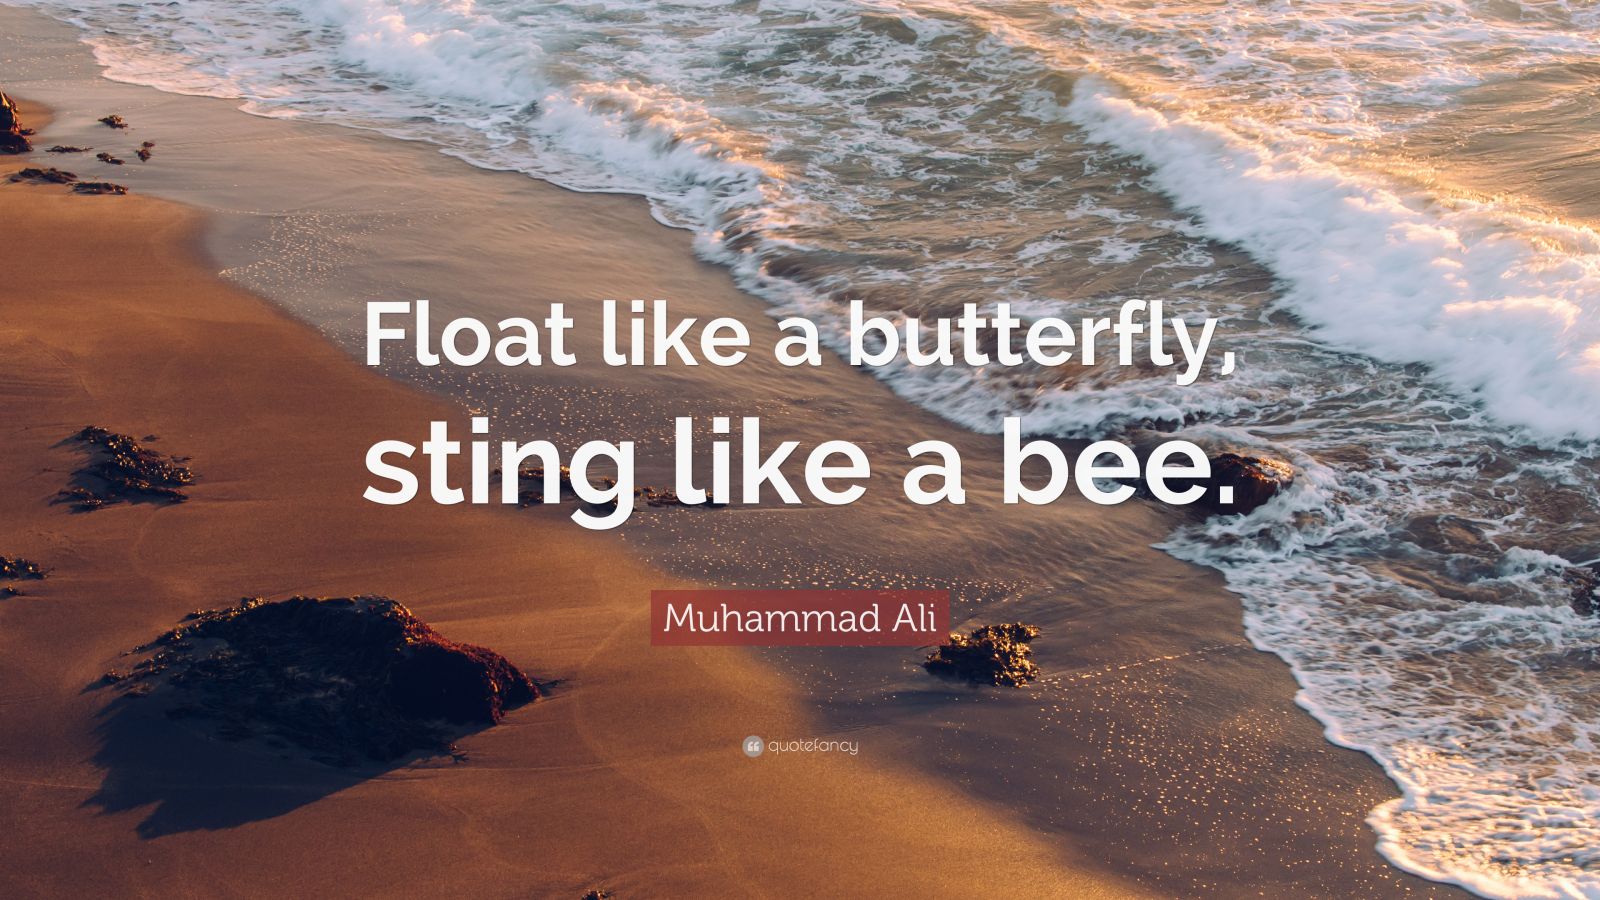 Muhammad Ali Quote “float Like A Butterfly Sting Like A Bee” 20 Wallpapers Quotefancy